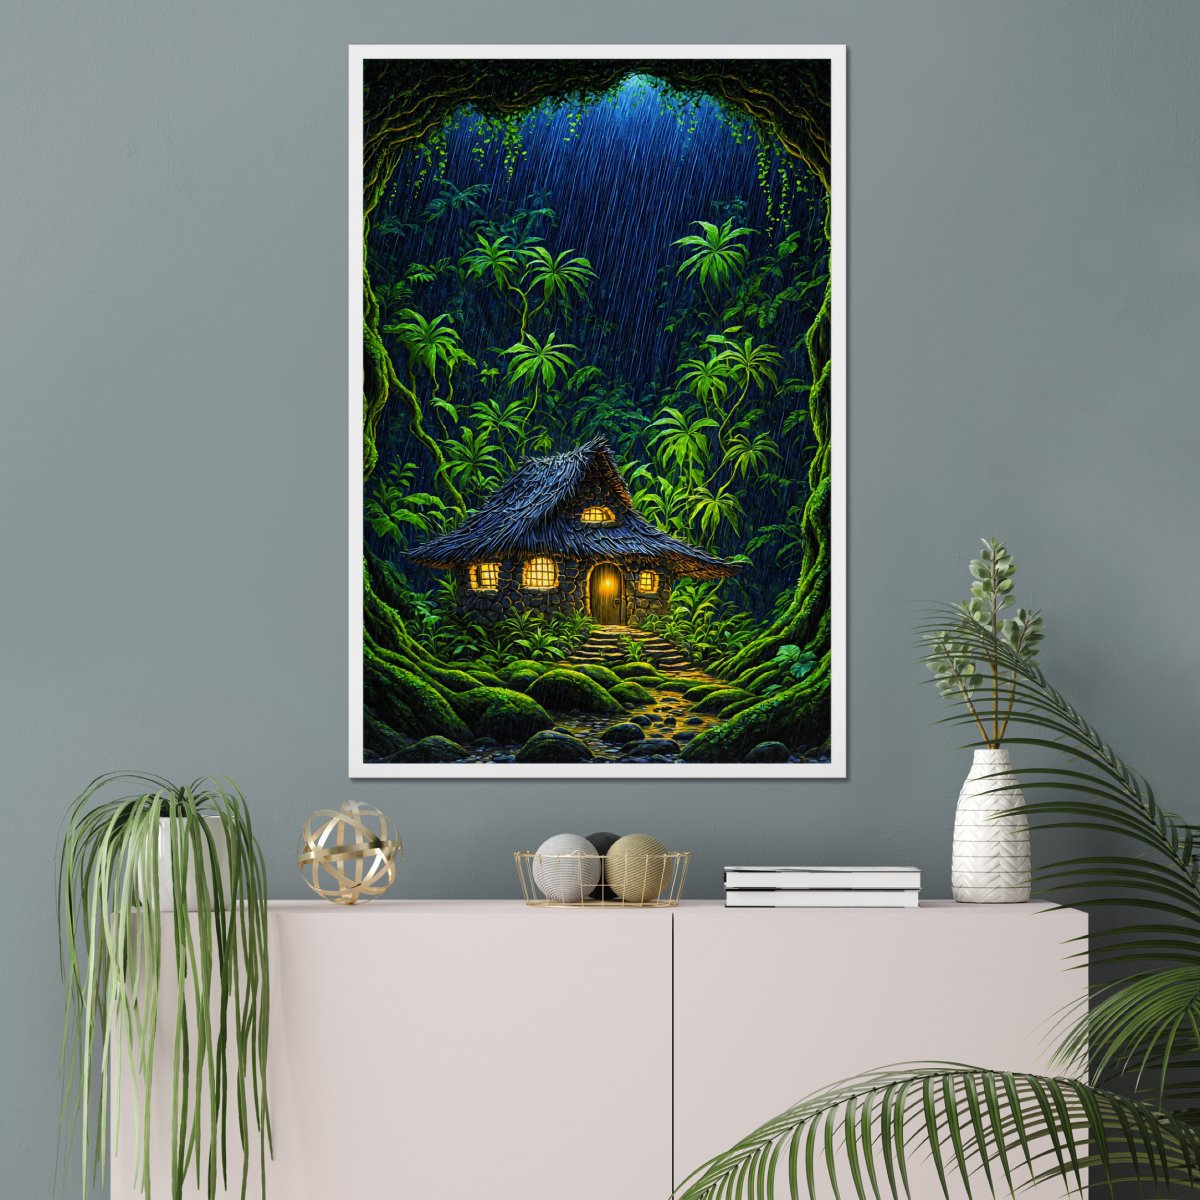 Tropical jungle gale - Art print - Poster - Ever colorful